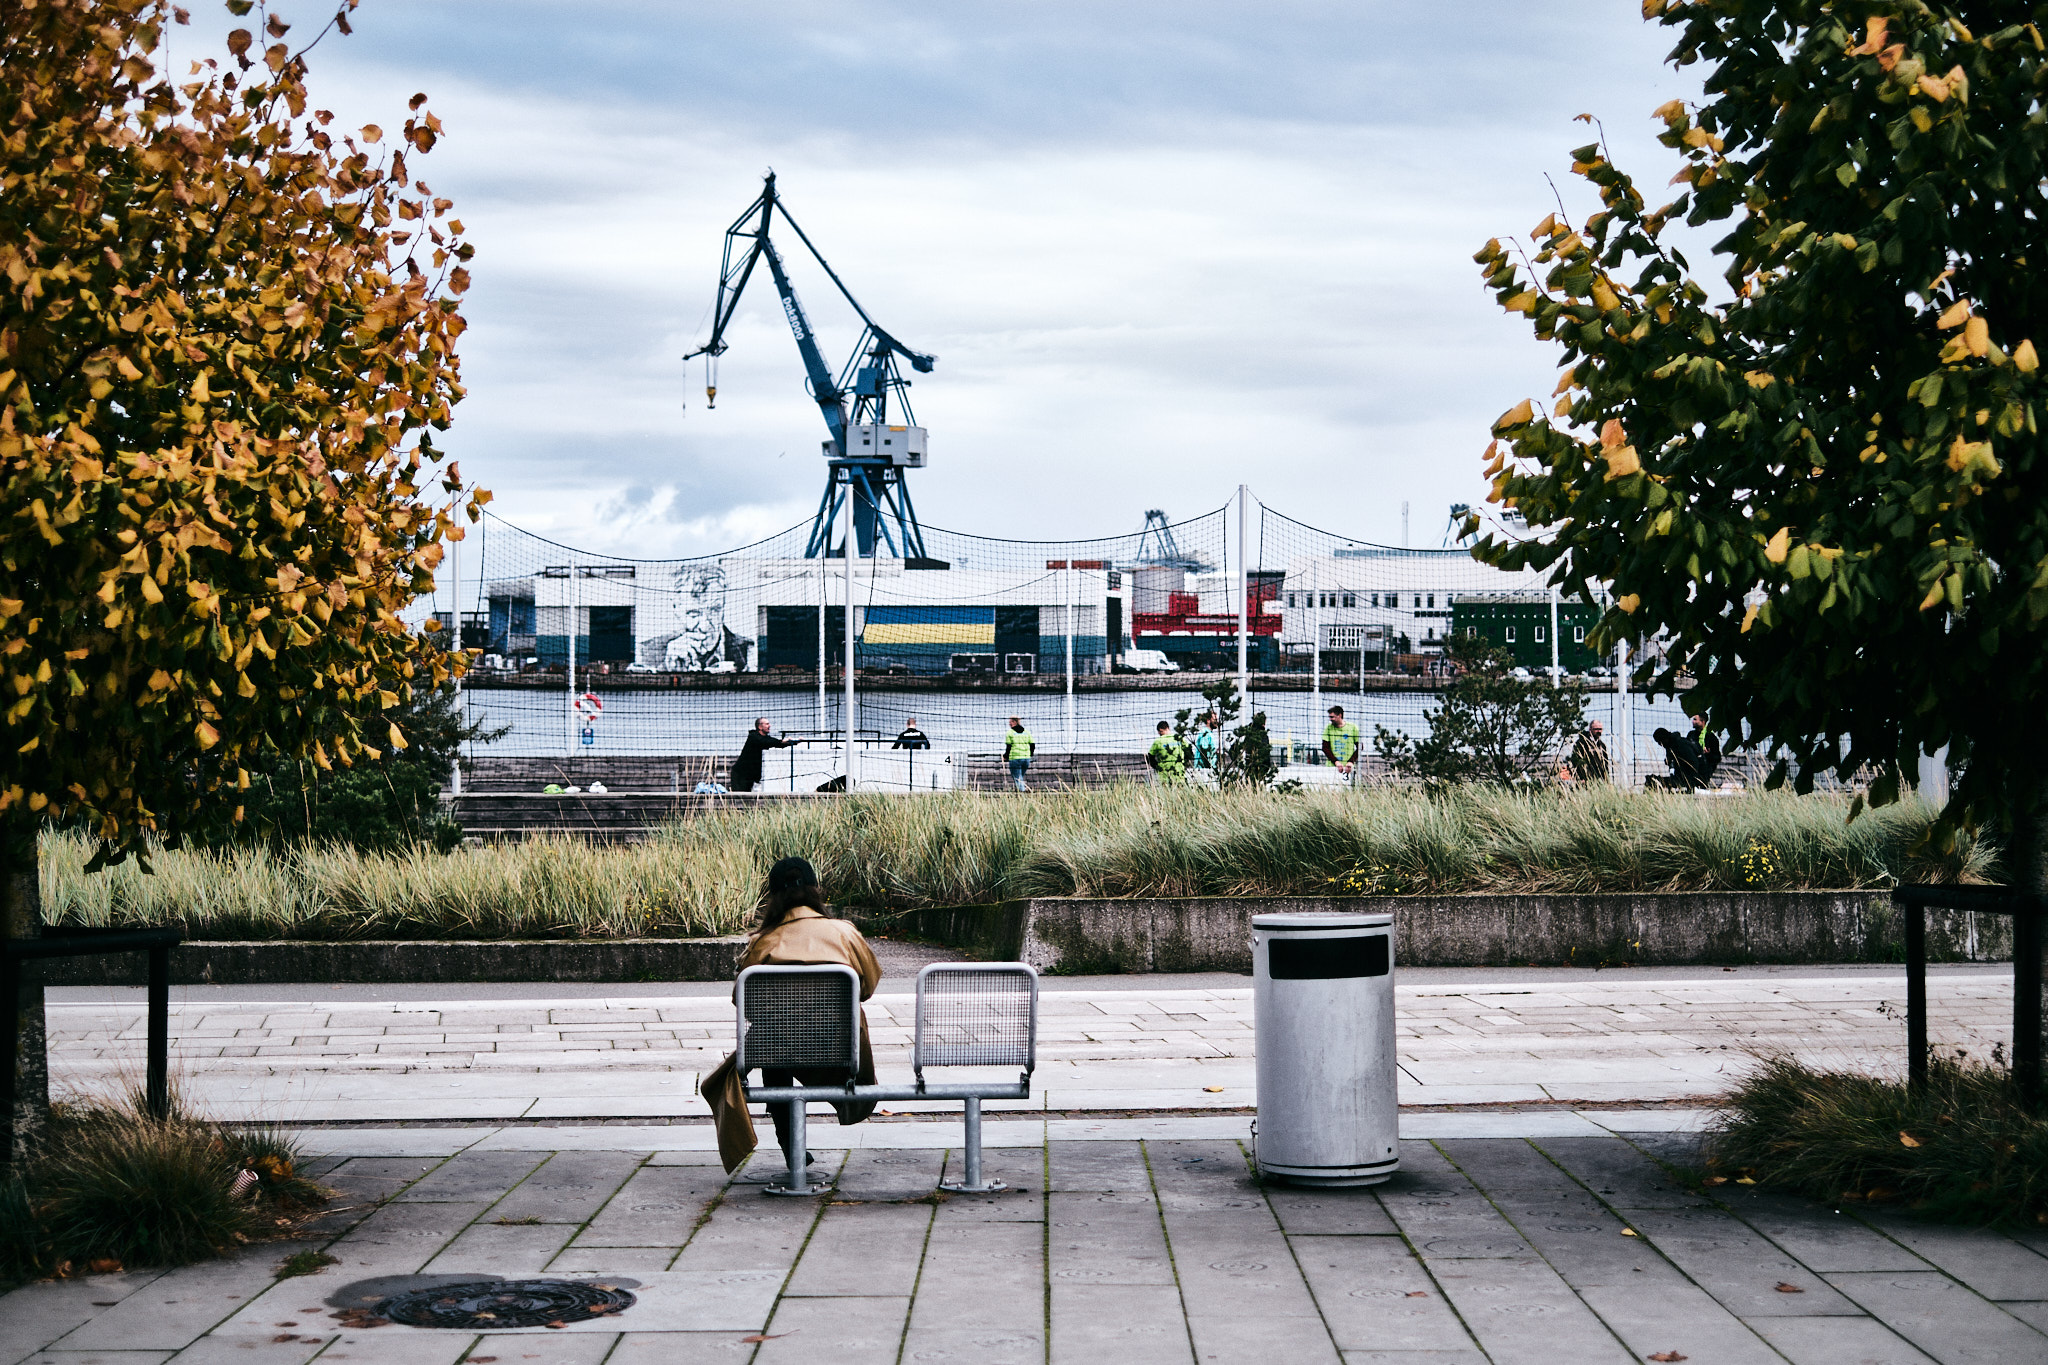 Sitting with a view and the trash - Street foto fra Aarhus